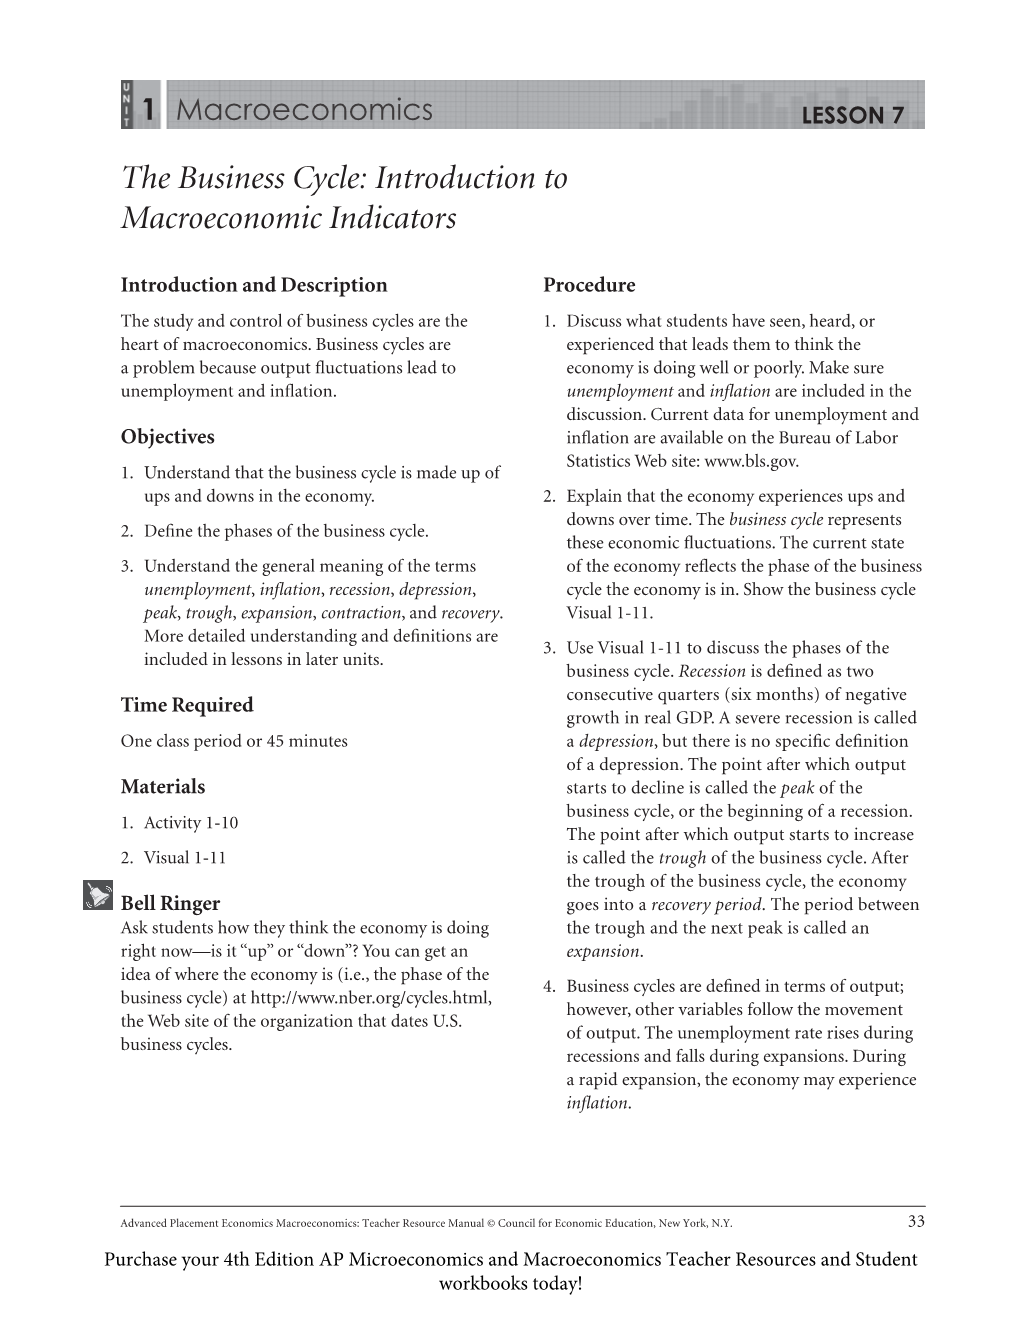 The Business Cycle: Introduction to Macroeconomic Indicators